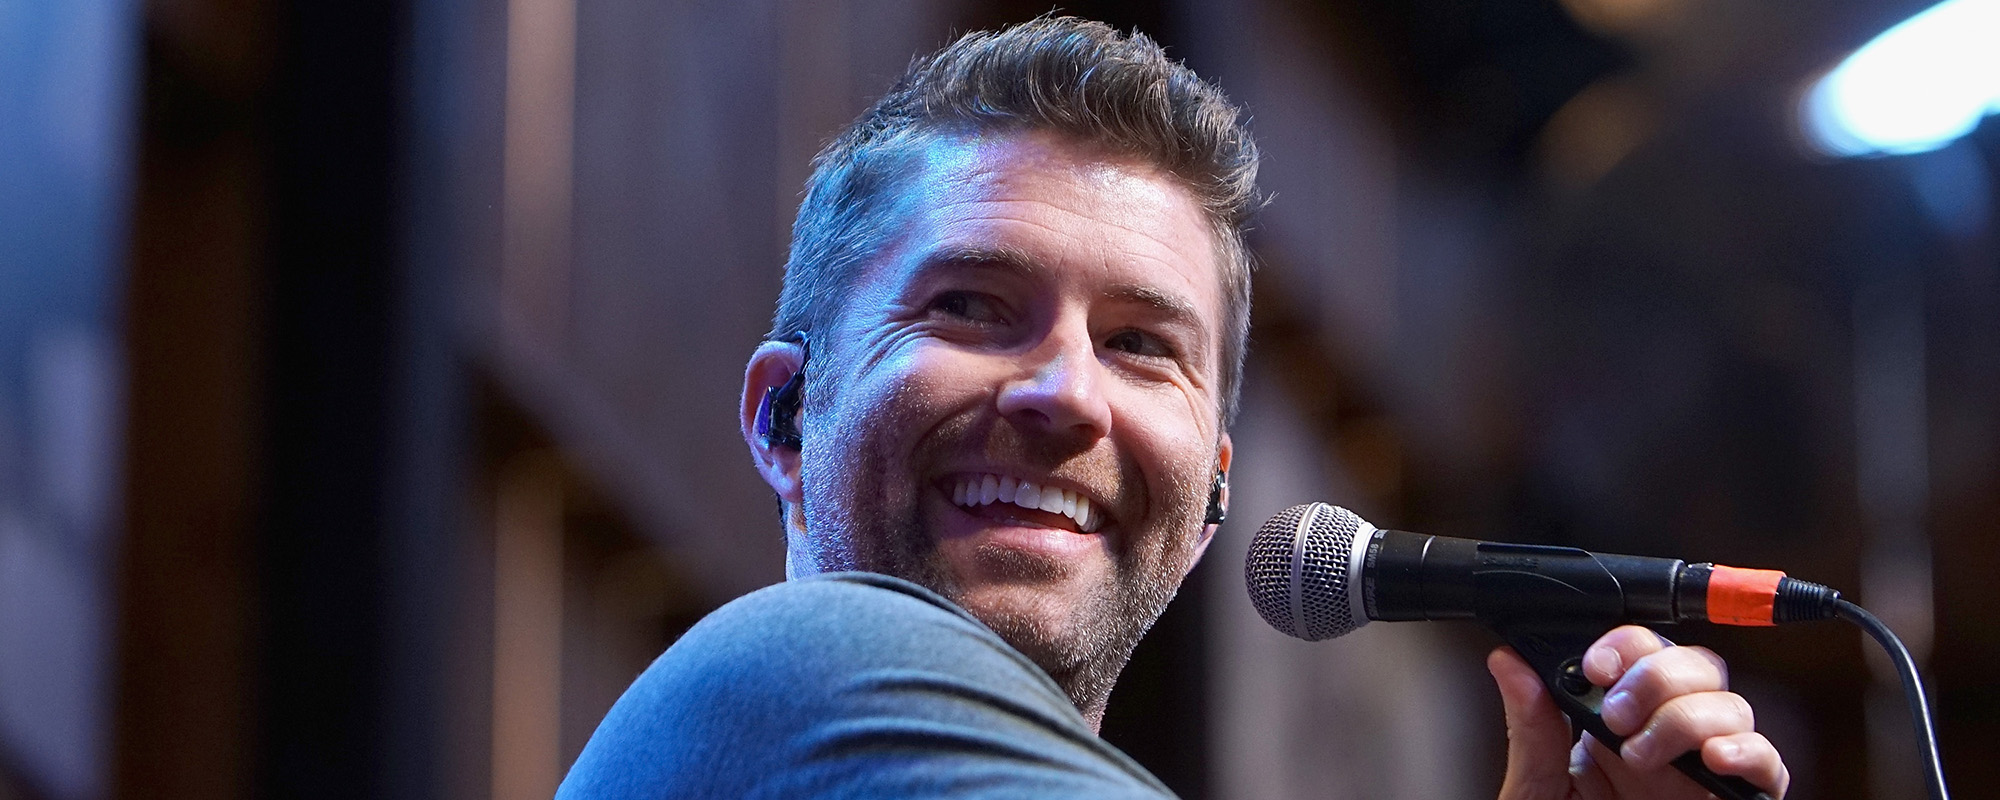 Josh Turner Joins Pandora Billionaires Club, is Honored by Home State